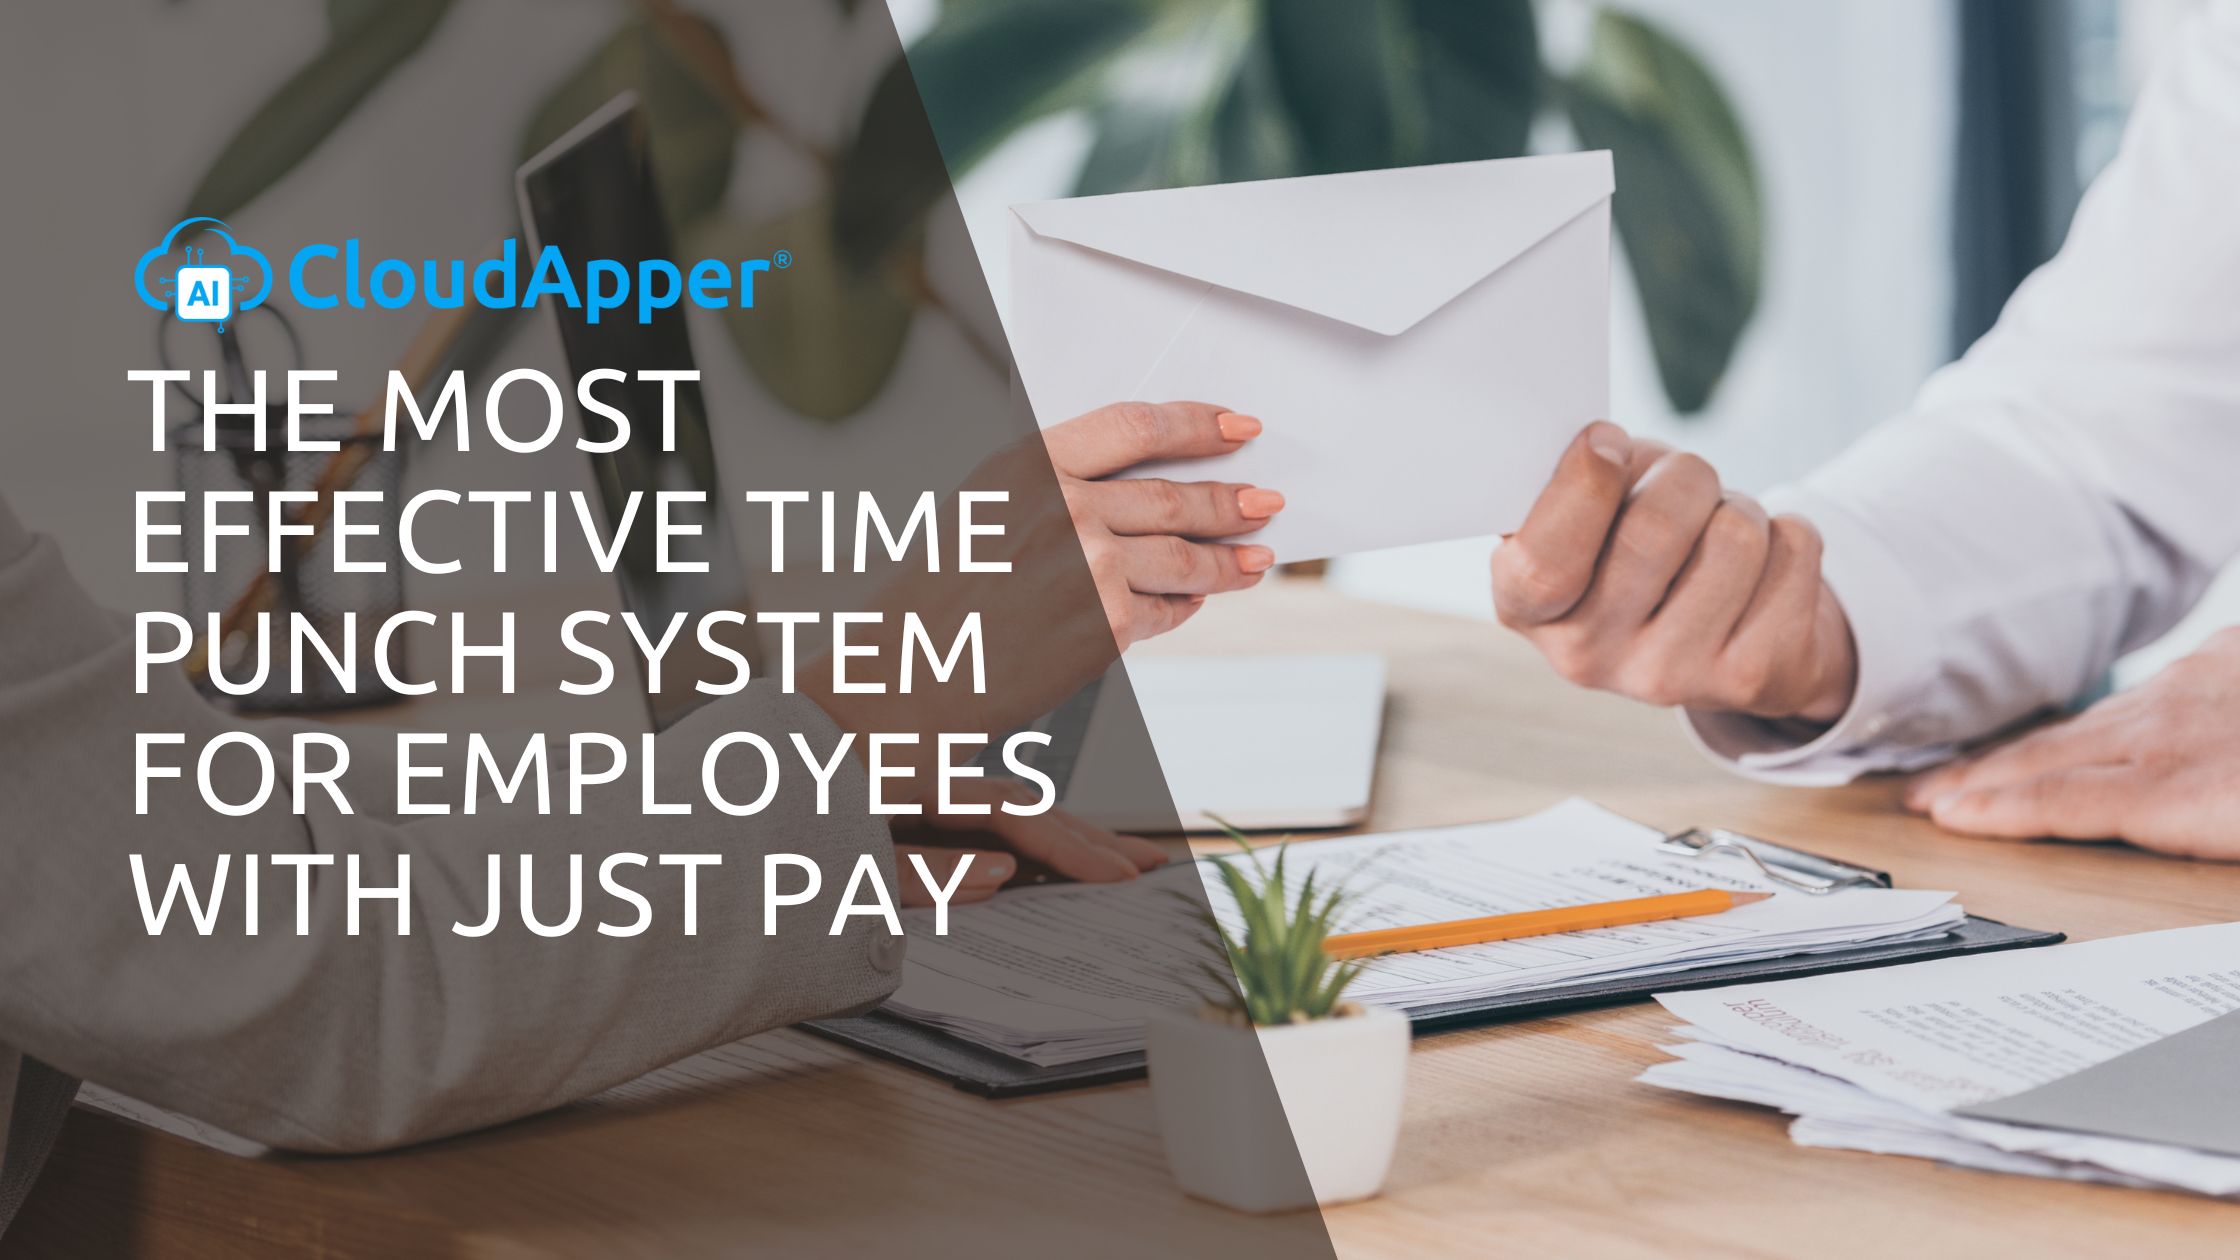 The Most Effective Time Punch System for Employees With Just Pay